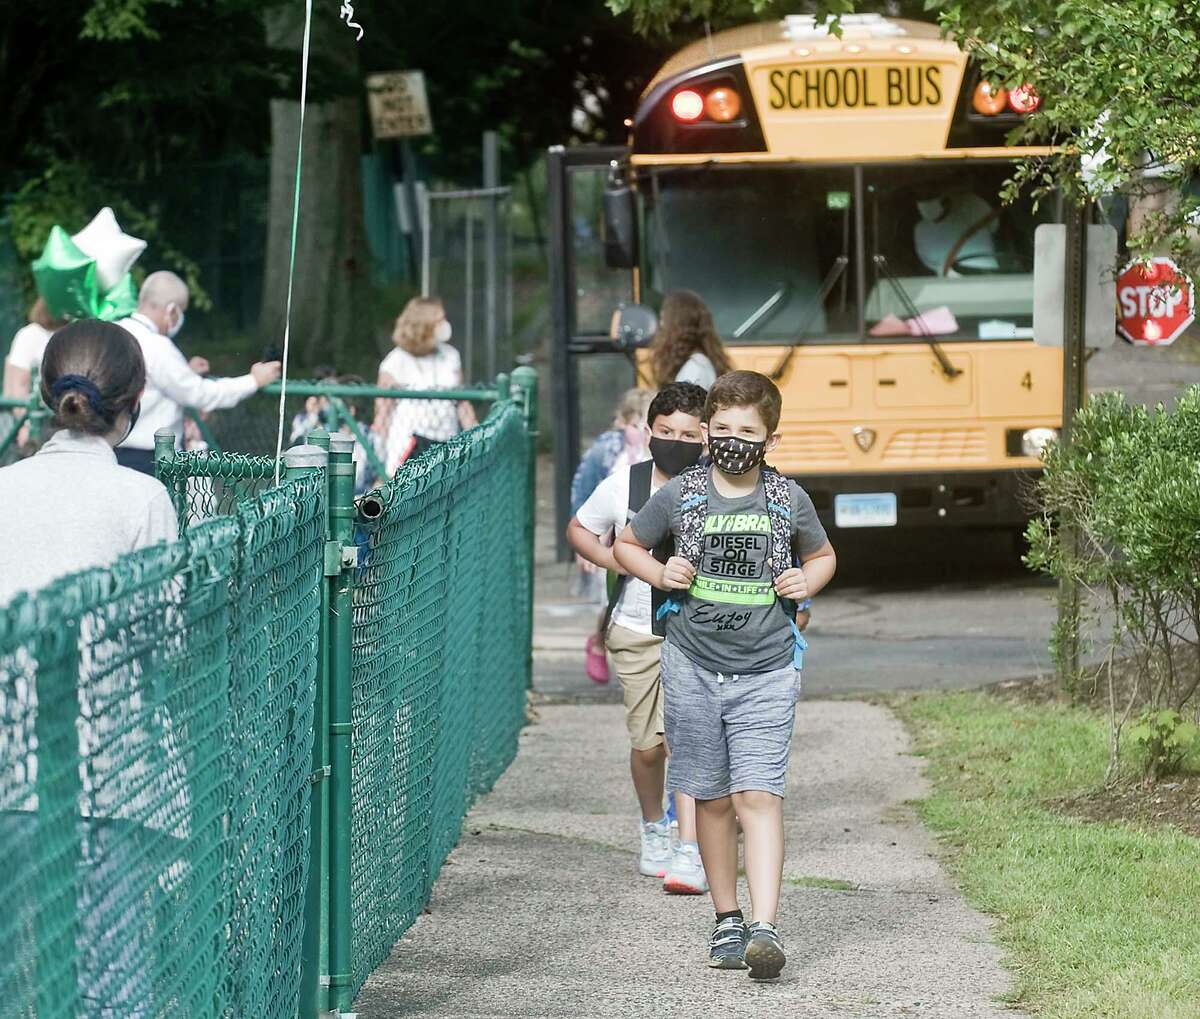 Kids arrive for the first day of school at Coleytown Elementary School. Tuesday, Sept. 8, 2020